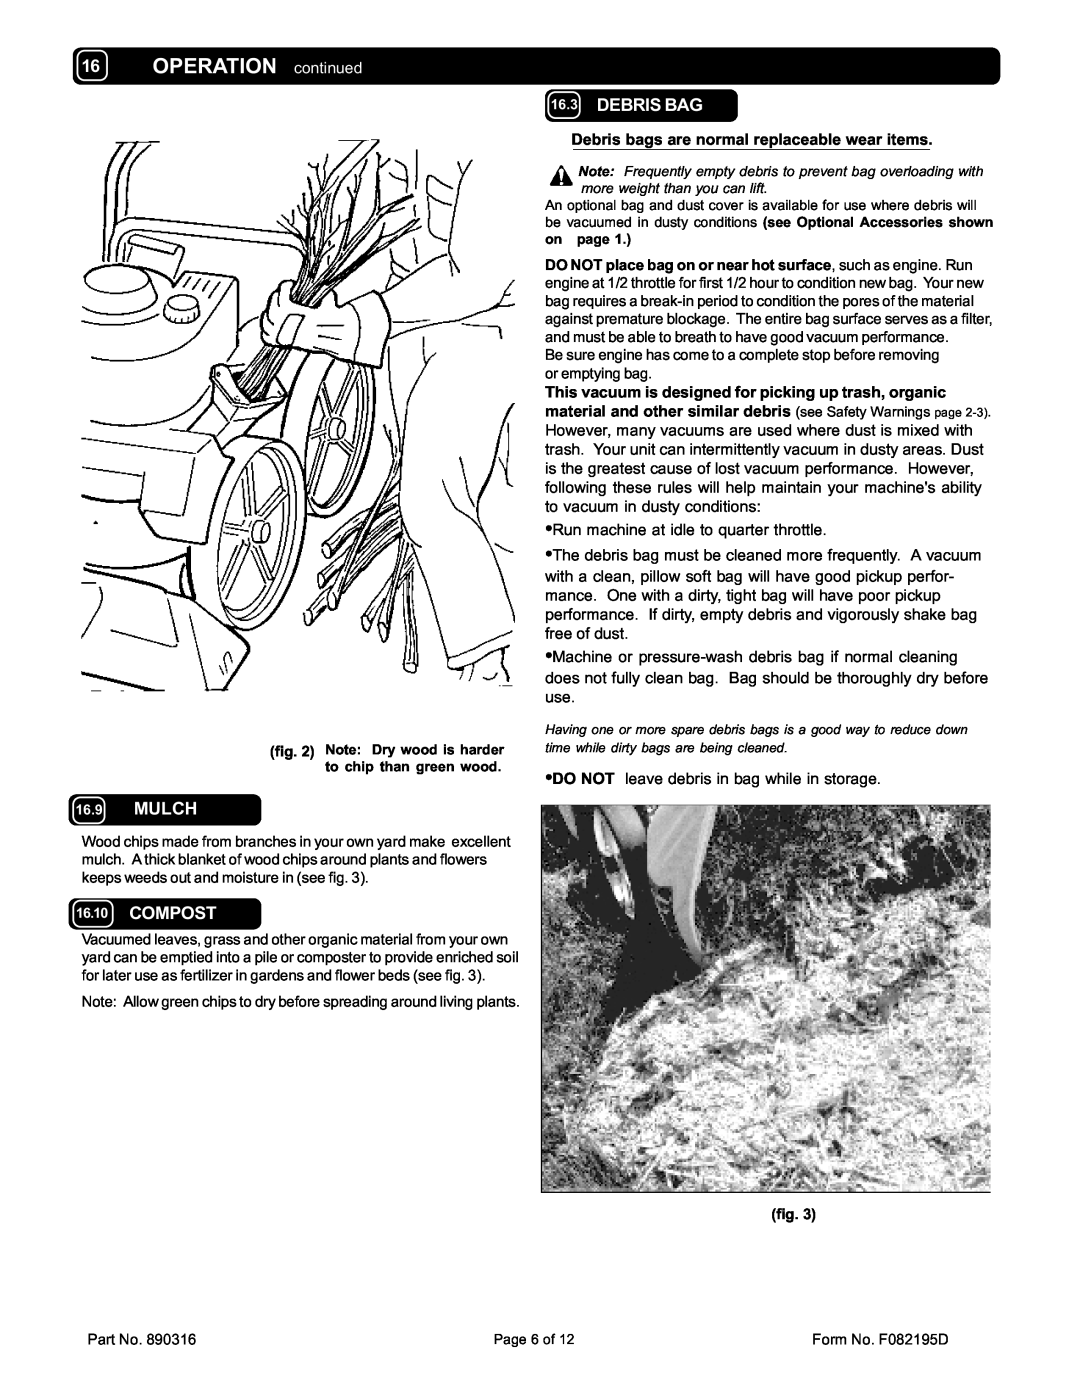 Billy Goat TKD505SPT specifications OPERATION continued, Debris Bag, Mulch, Compost 